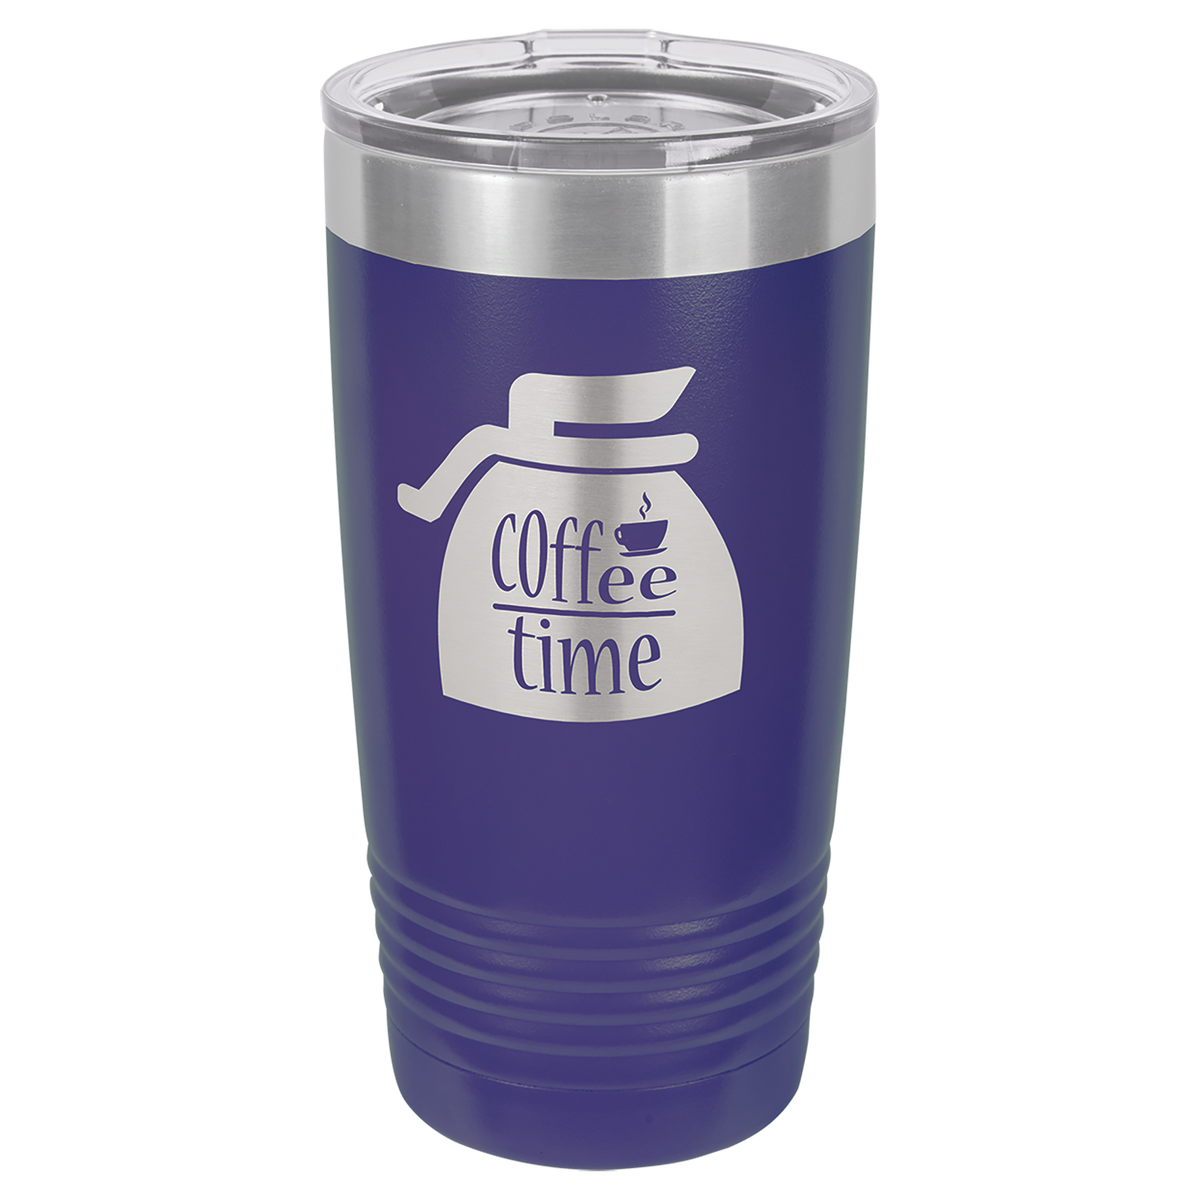 Bundle Deal for First-Time Customers - 8 Personalized 20 oz. Tumblers - Polar Camel